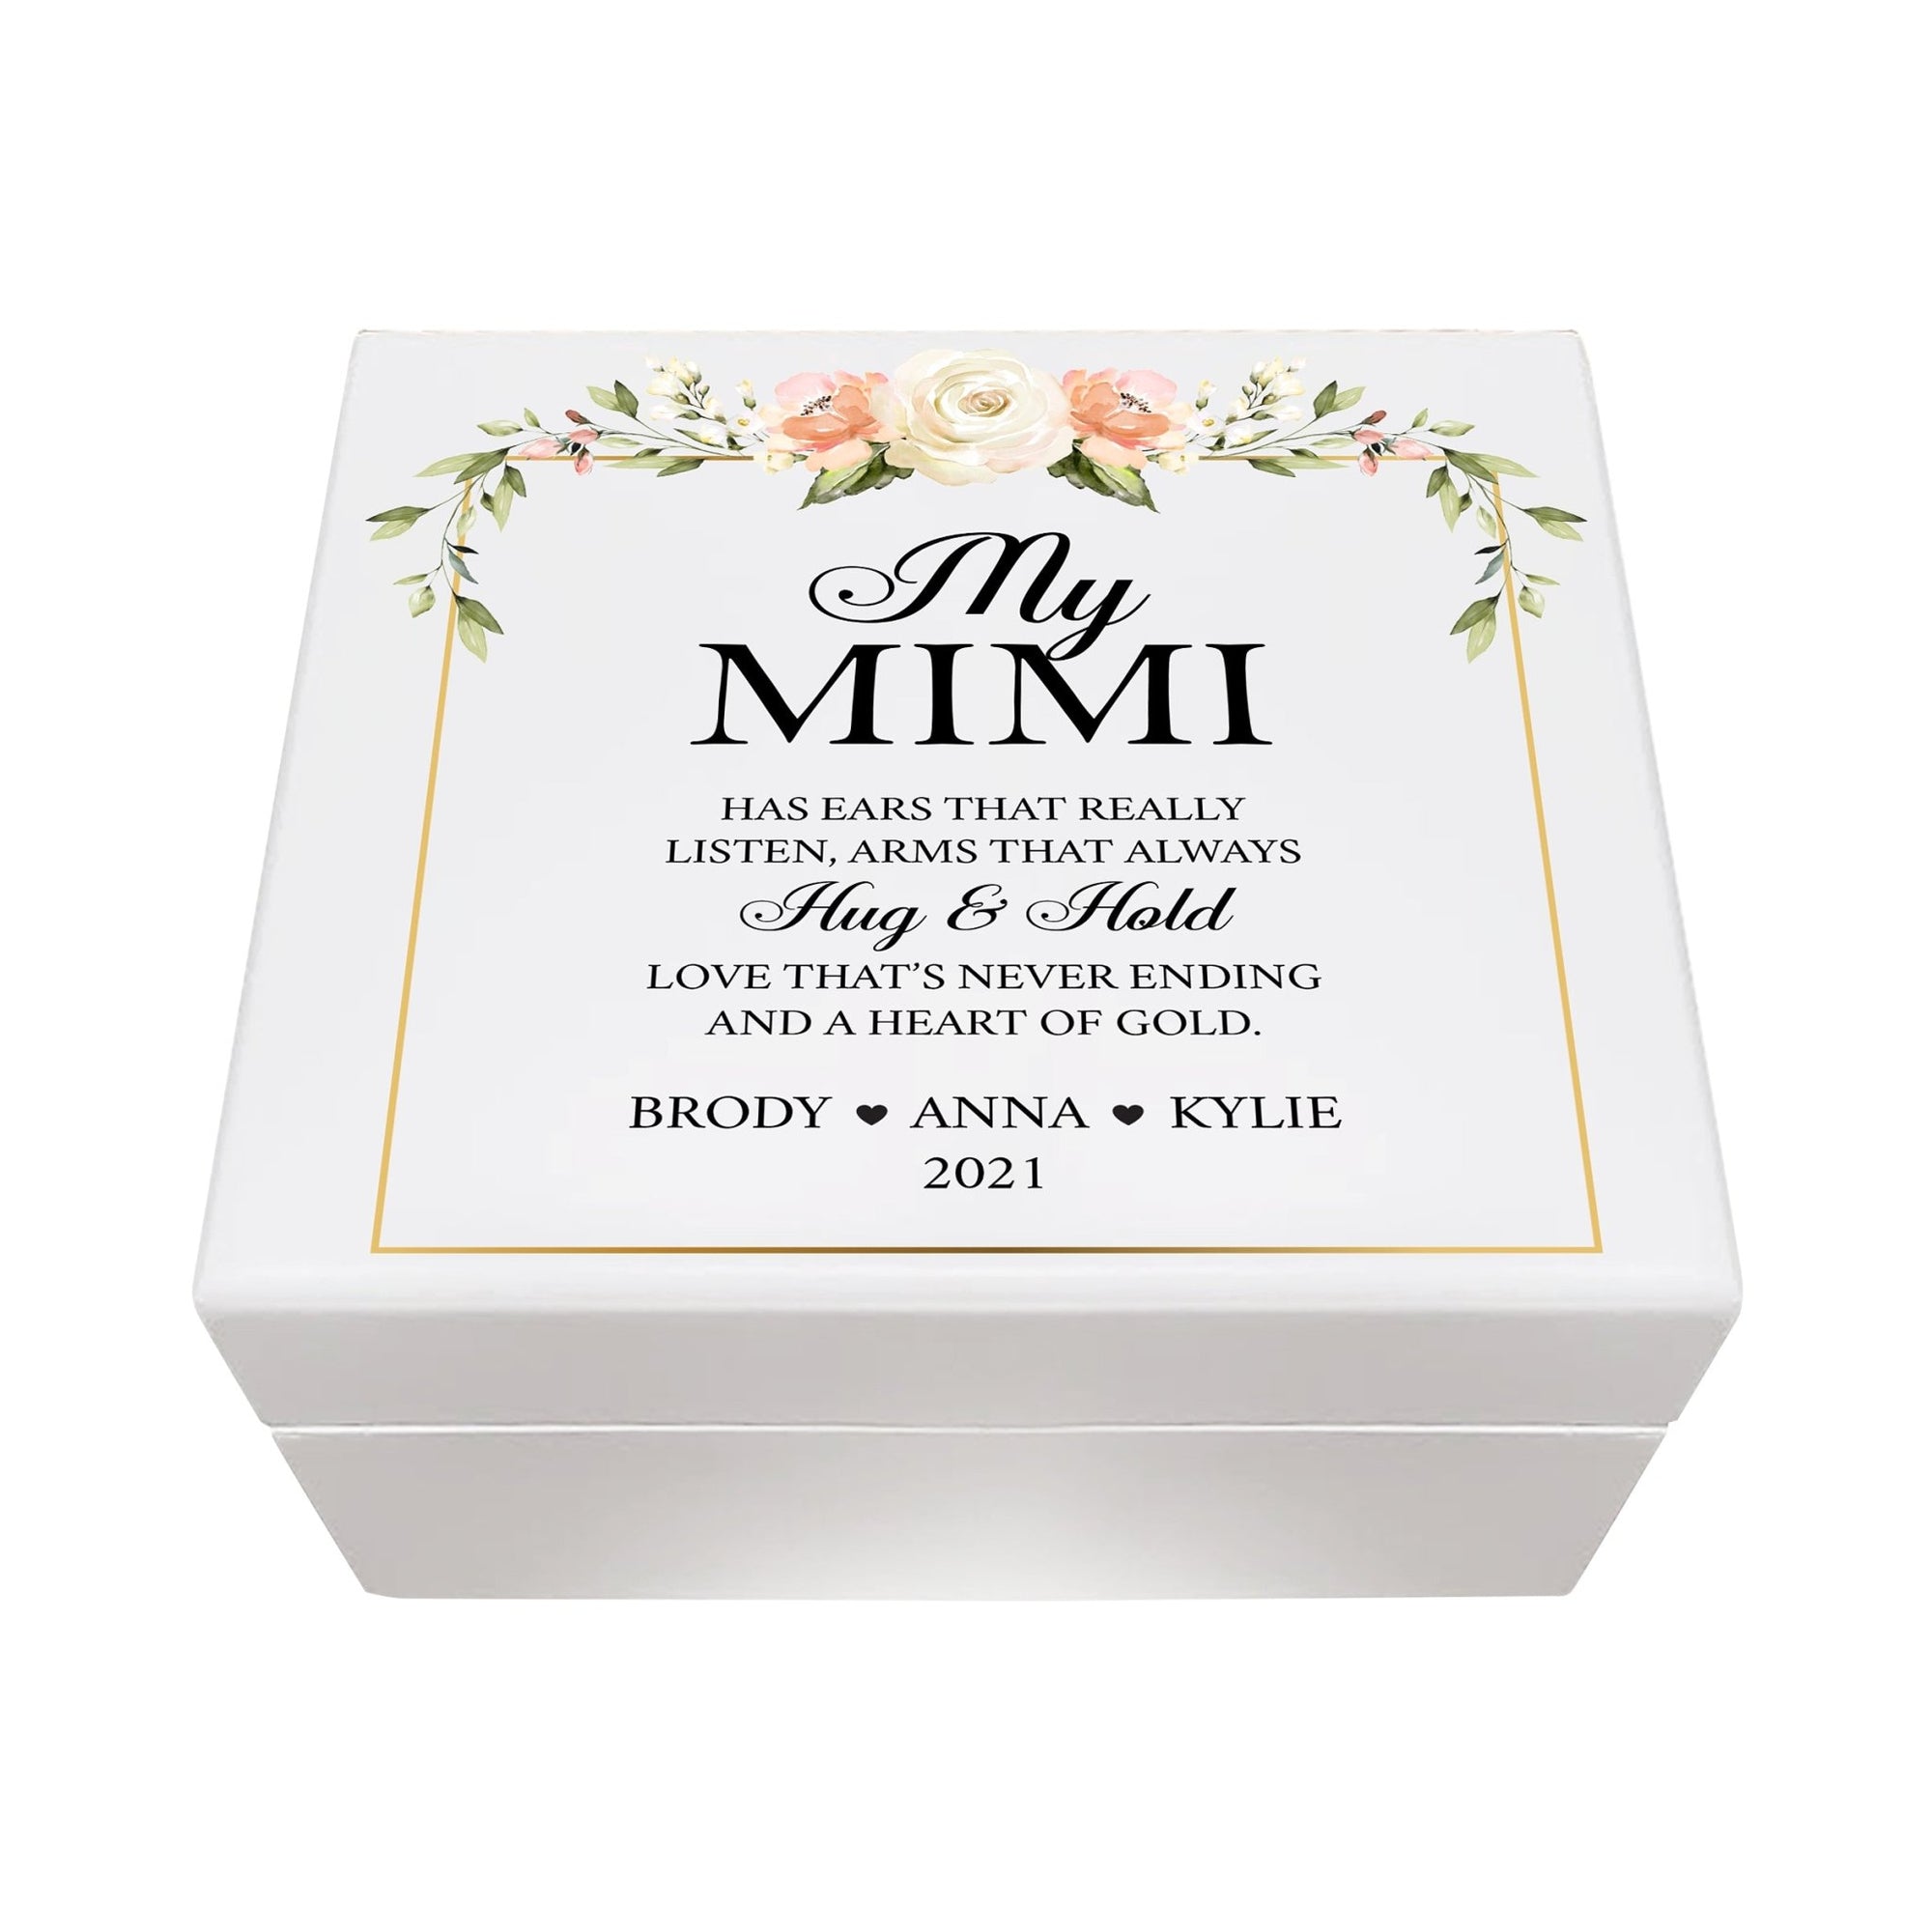 Personalized Mimi’s White Keepsake Box 6x5.5in with Inspirational verse - Hug and Hold - LifeSong Milestones